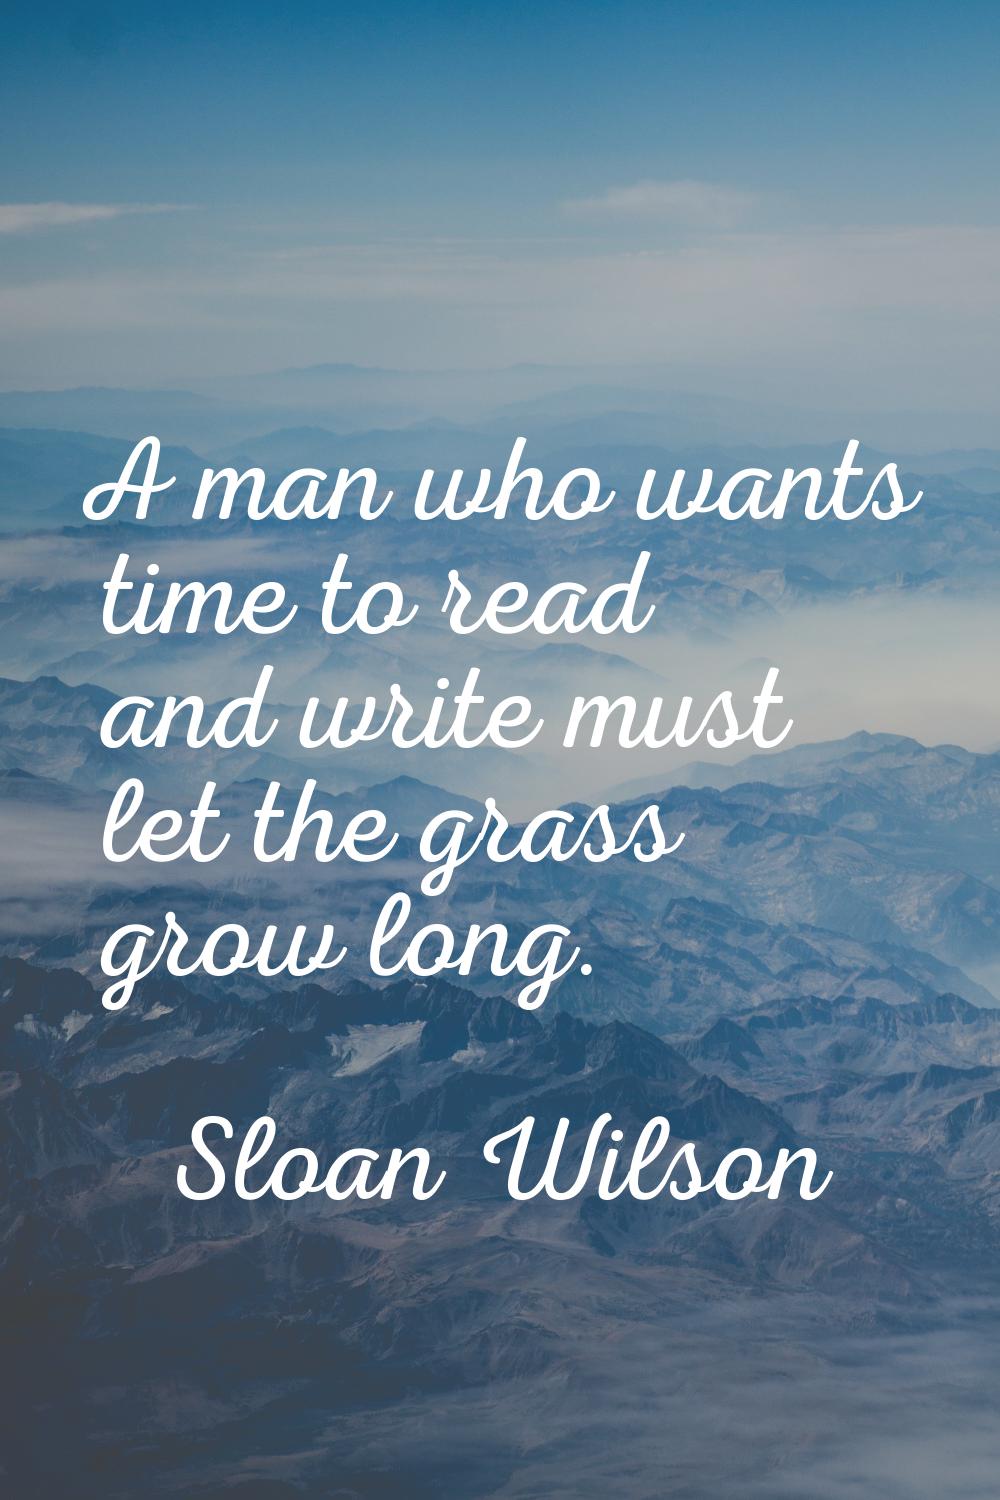 A man who wants time to read and write must let the grass grow long.